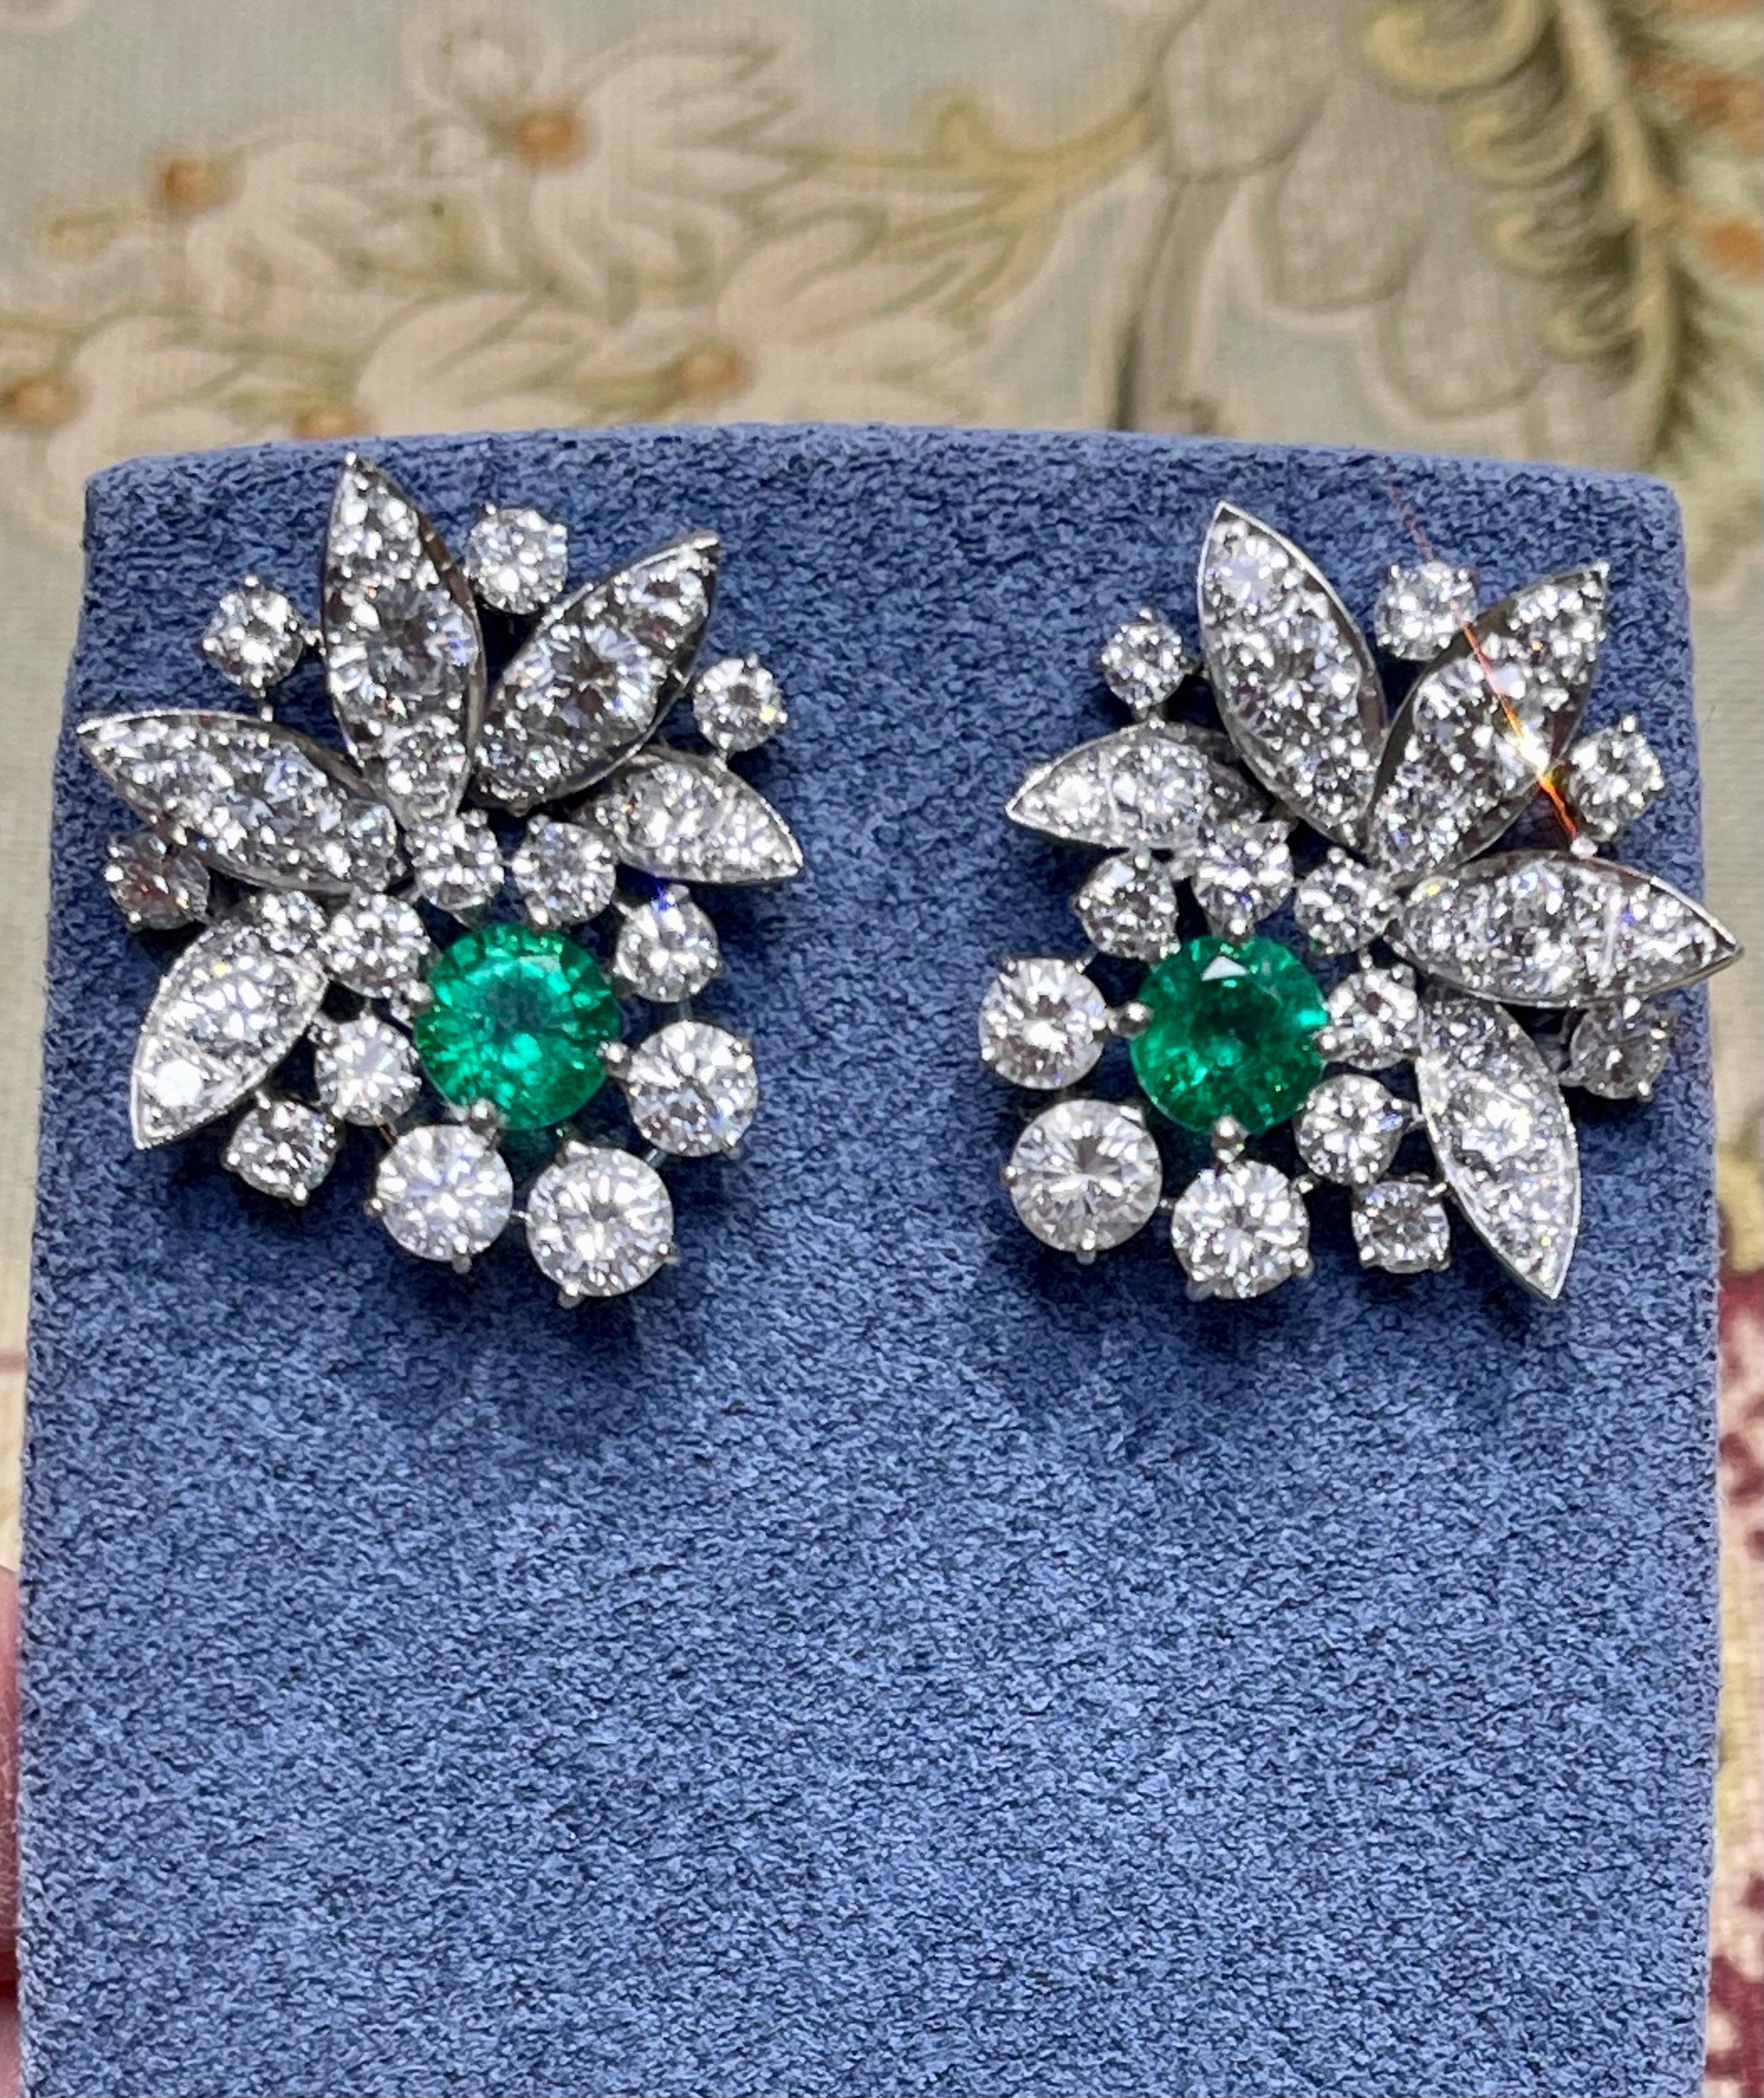 Enchanting and luxurious, these old Hollywood style earring are a must have.
These radiant green Zambian emeralds shine at the center, surrounded by 54 sparkling diamonds. 
Each earring has a large backing to keep them hanging straight on your